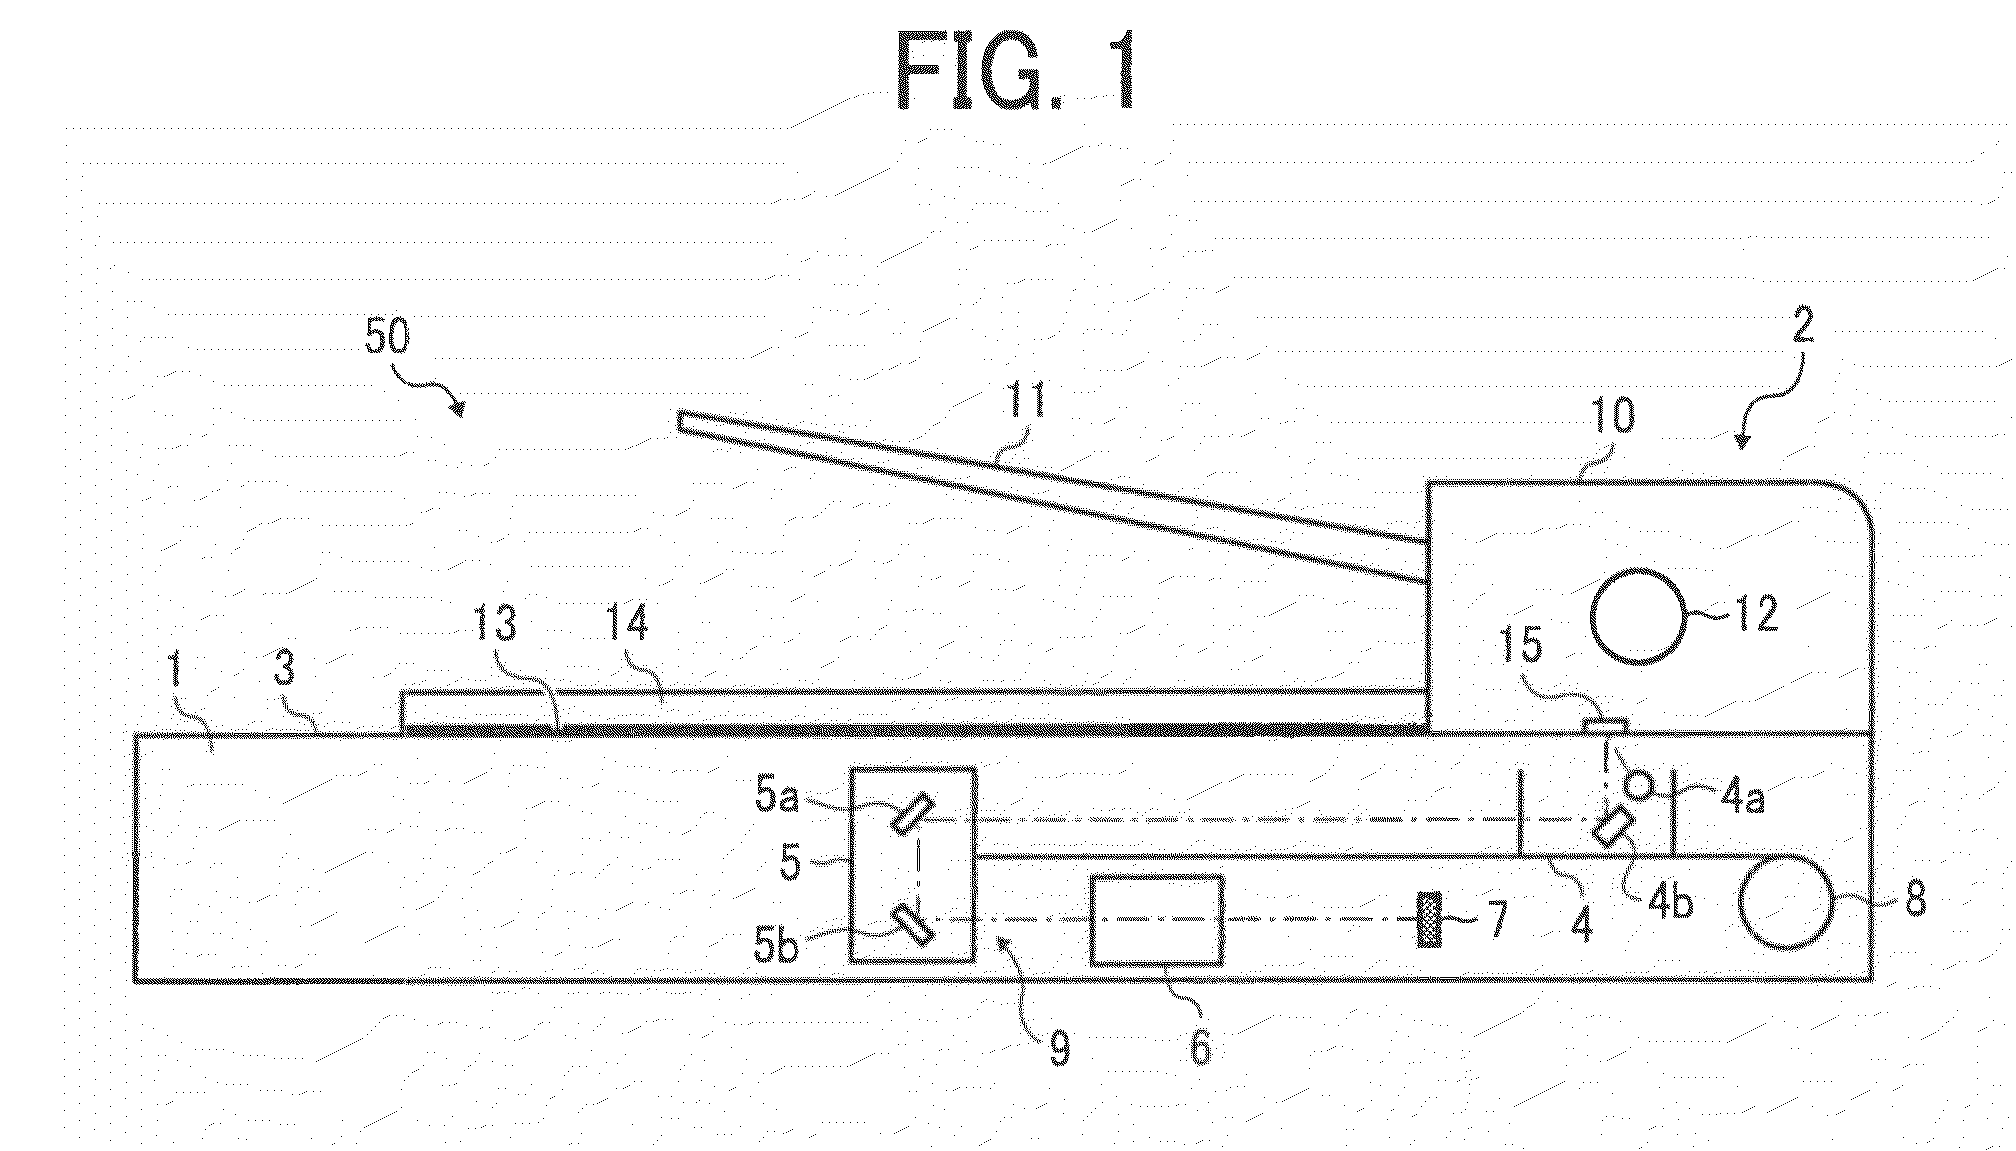 Image processing apparatus and method using different scaling methods for scanning